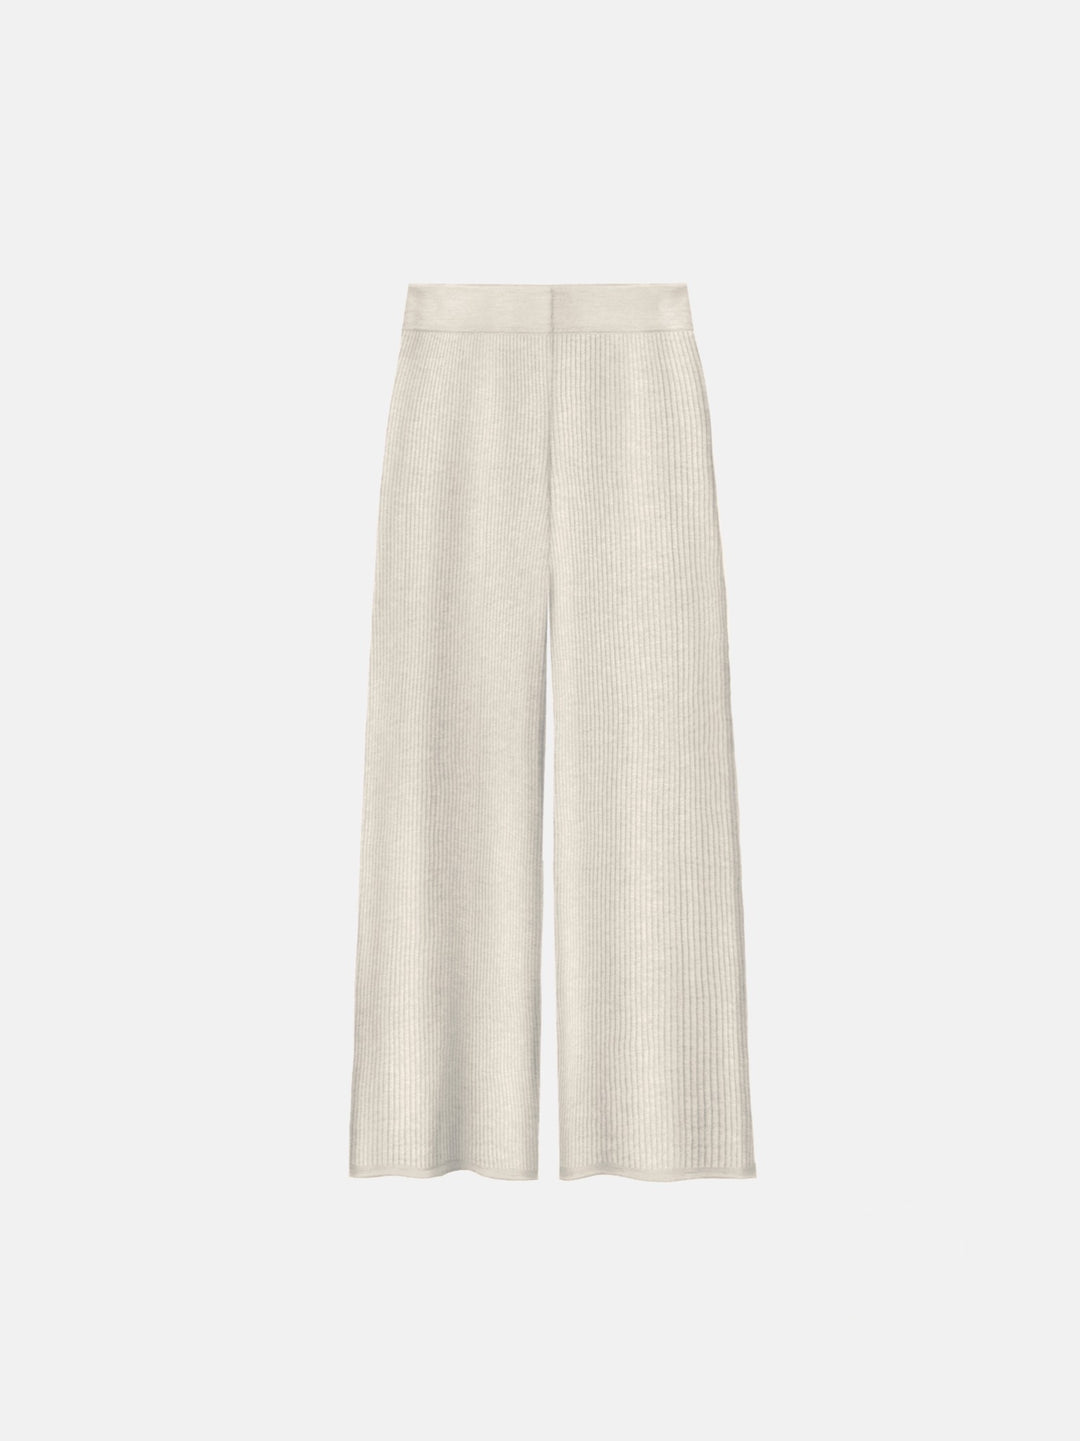 Wide Textured Knit Trousers - Creme